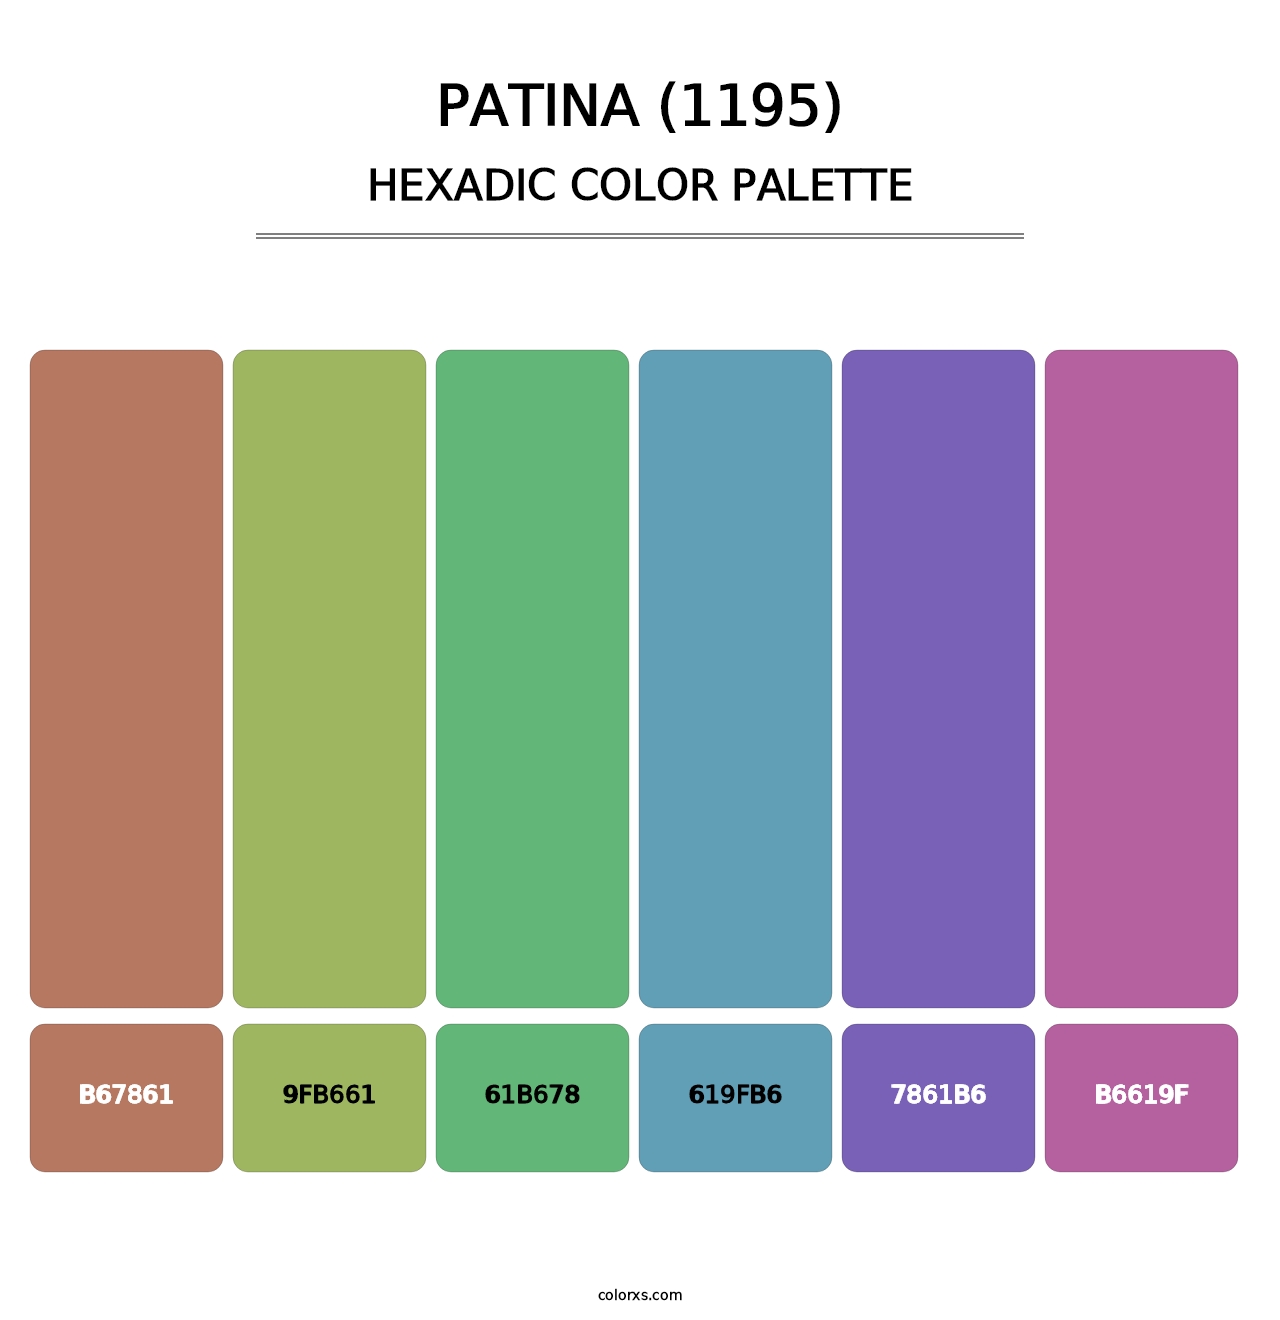 Patina (1195) - Hexadic Color Palette